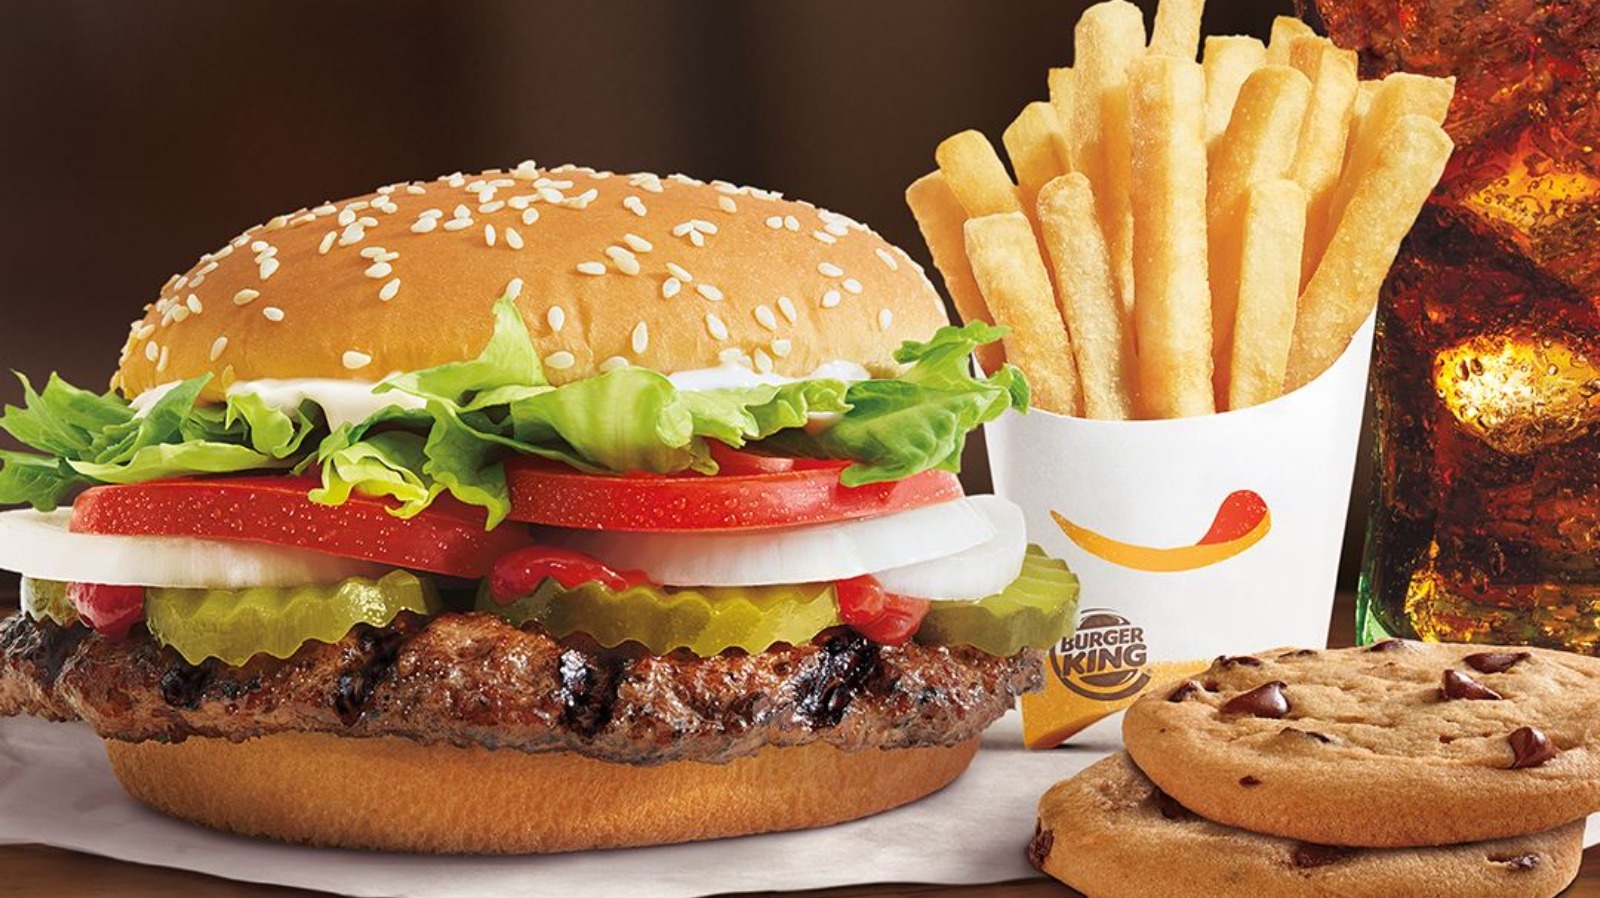 Why Burger King Spain Came Under Fire For Its Holy Week